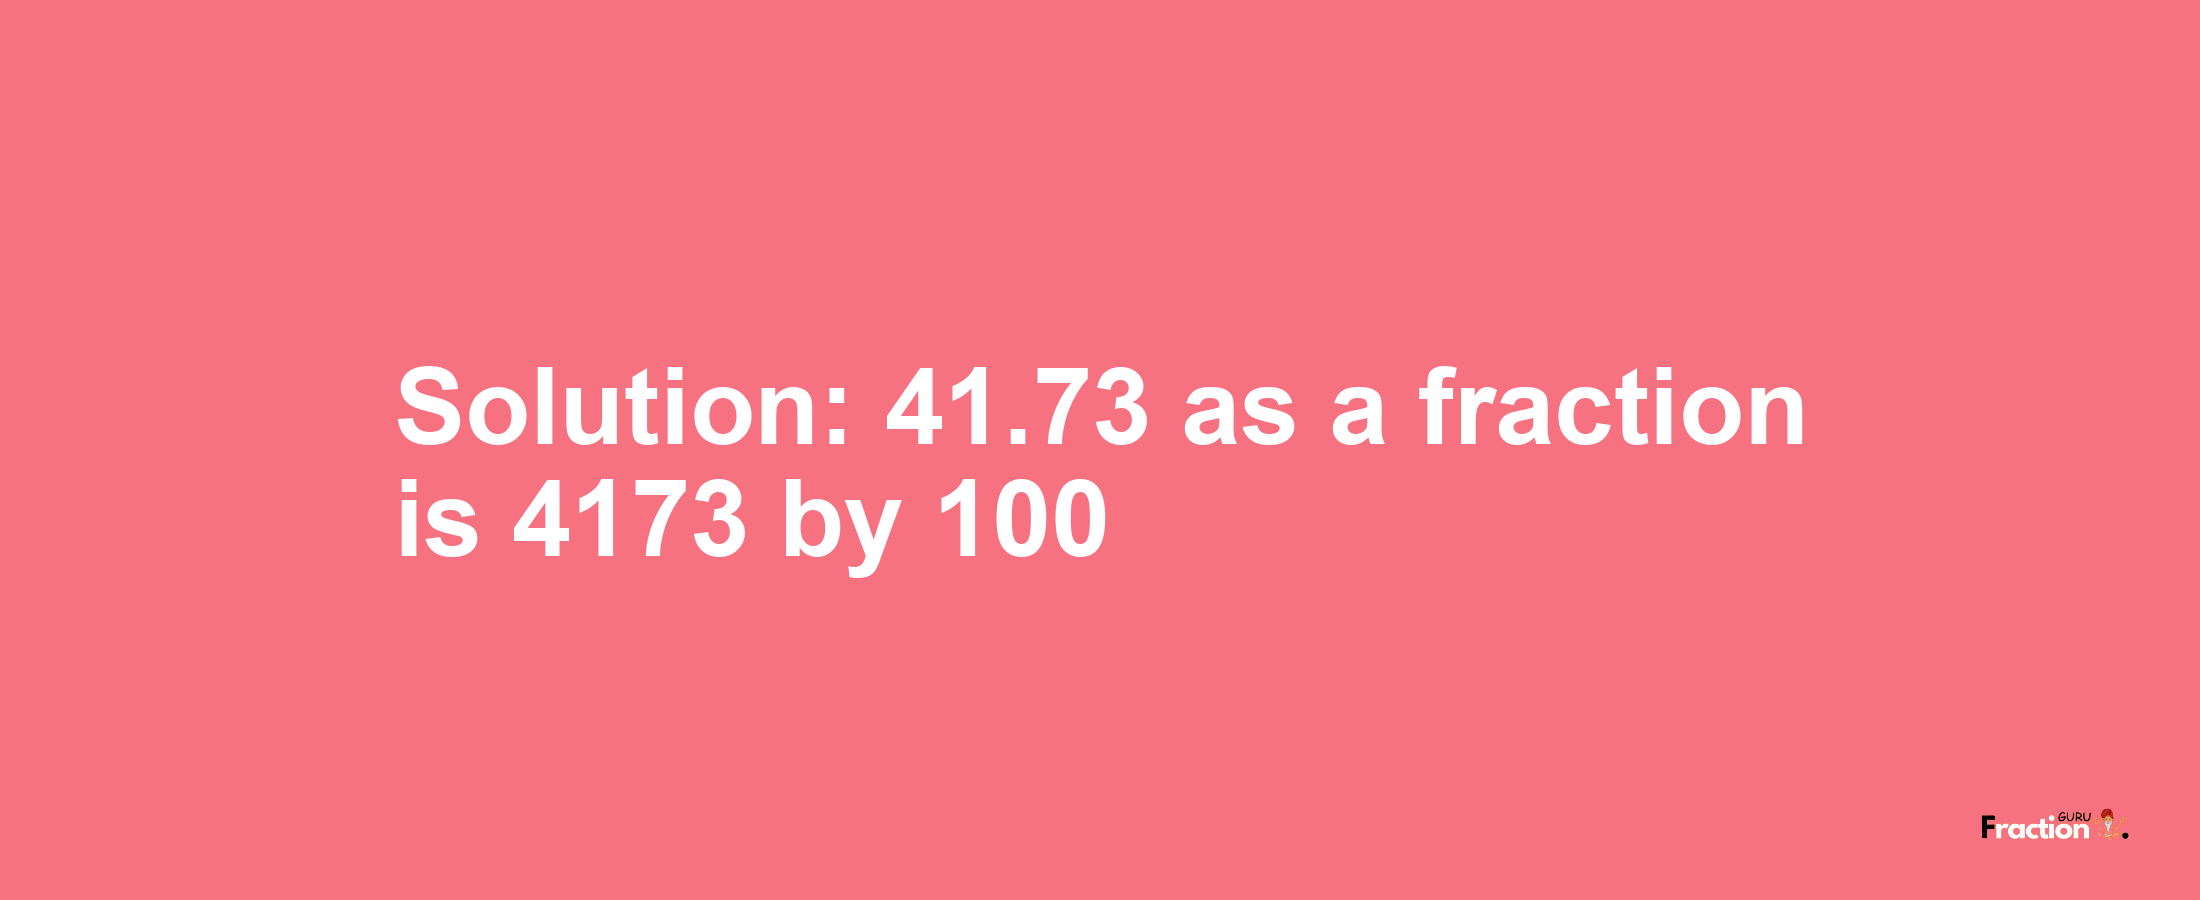 Solution:41.73 as a fraction is 4173/100